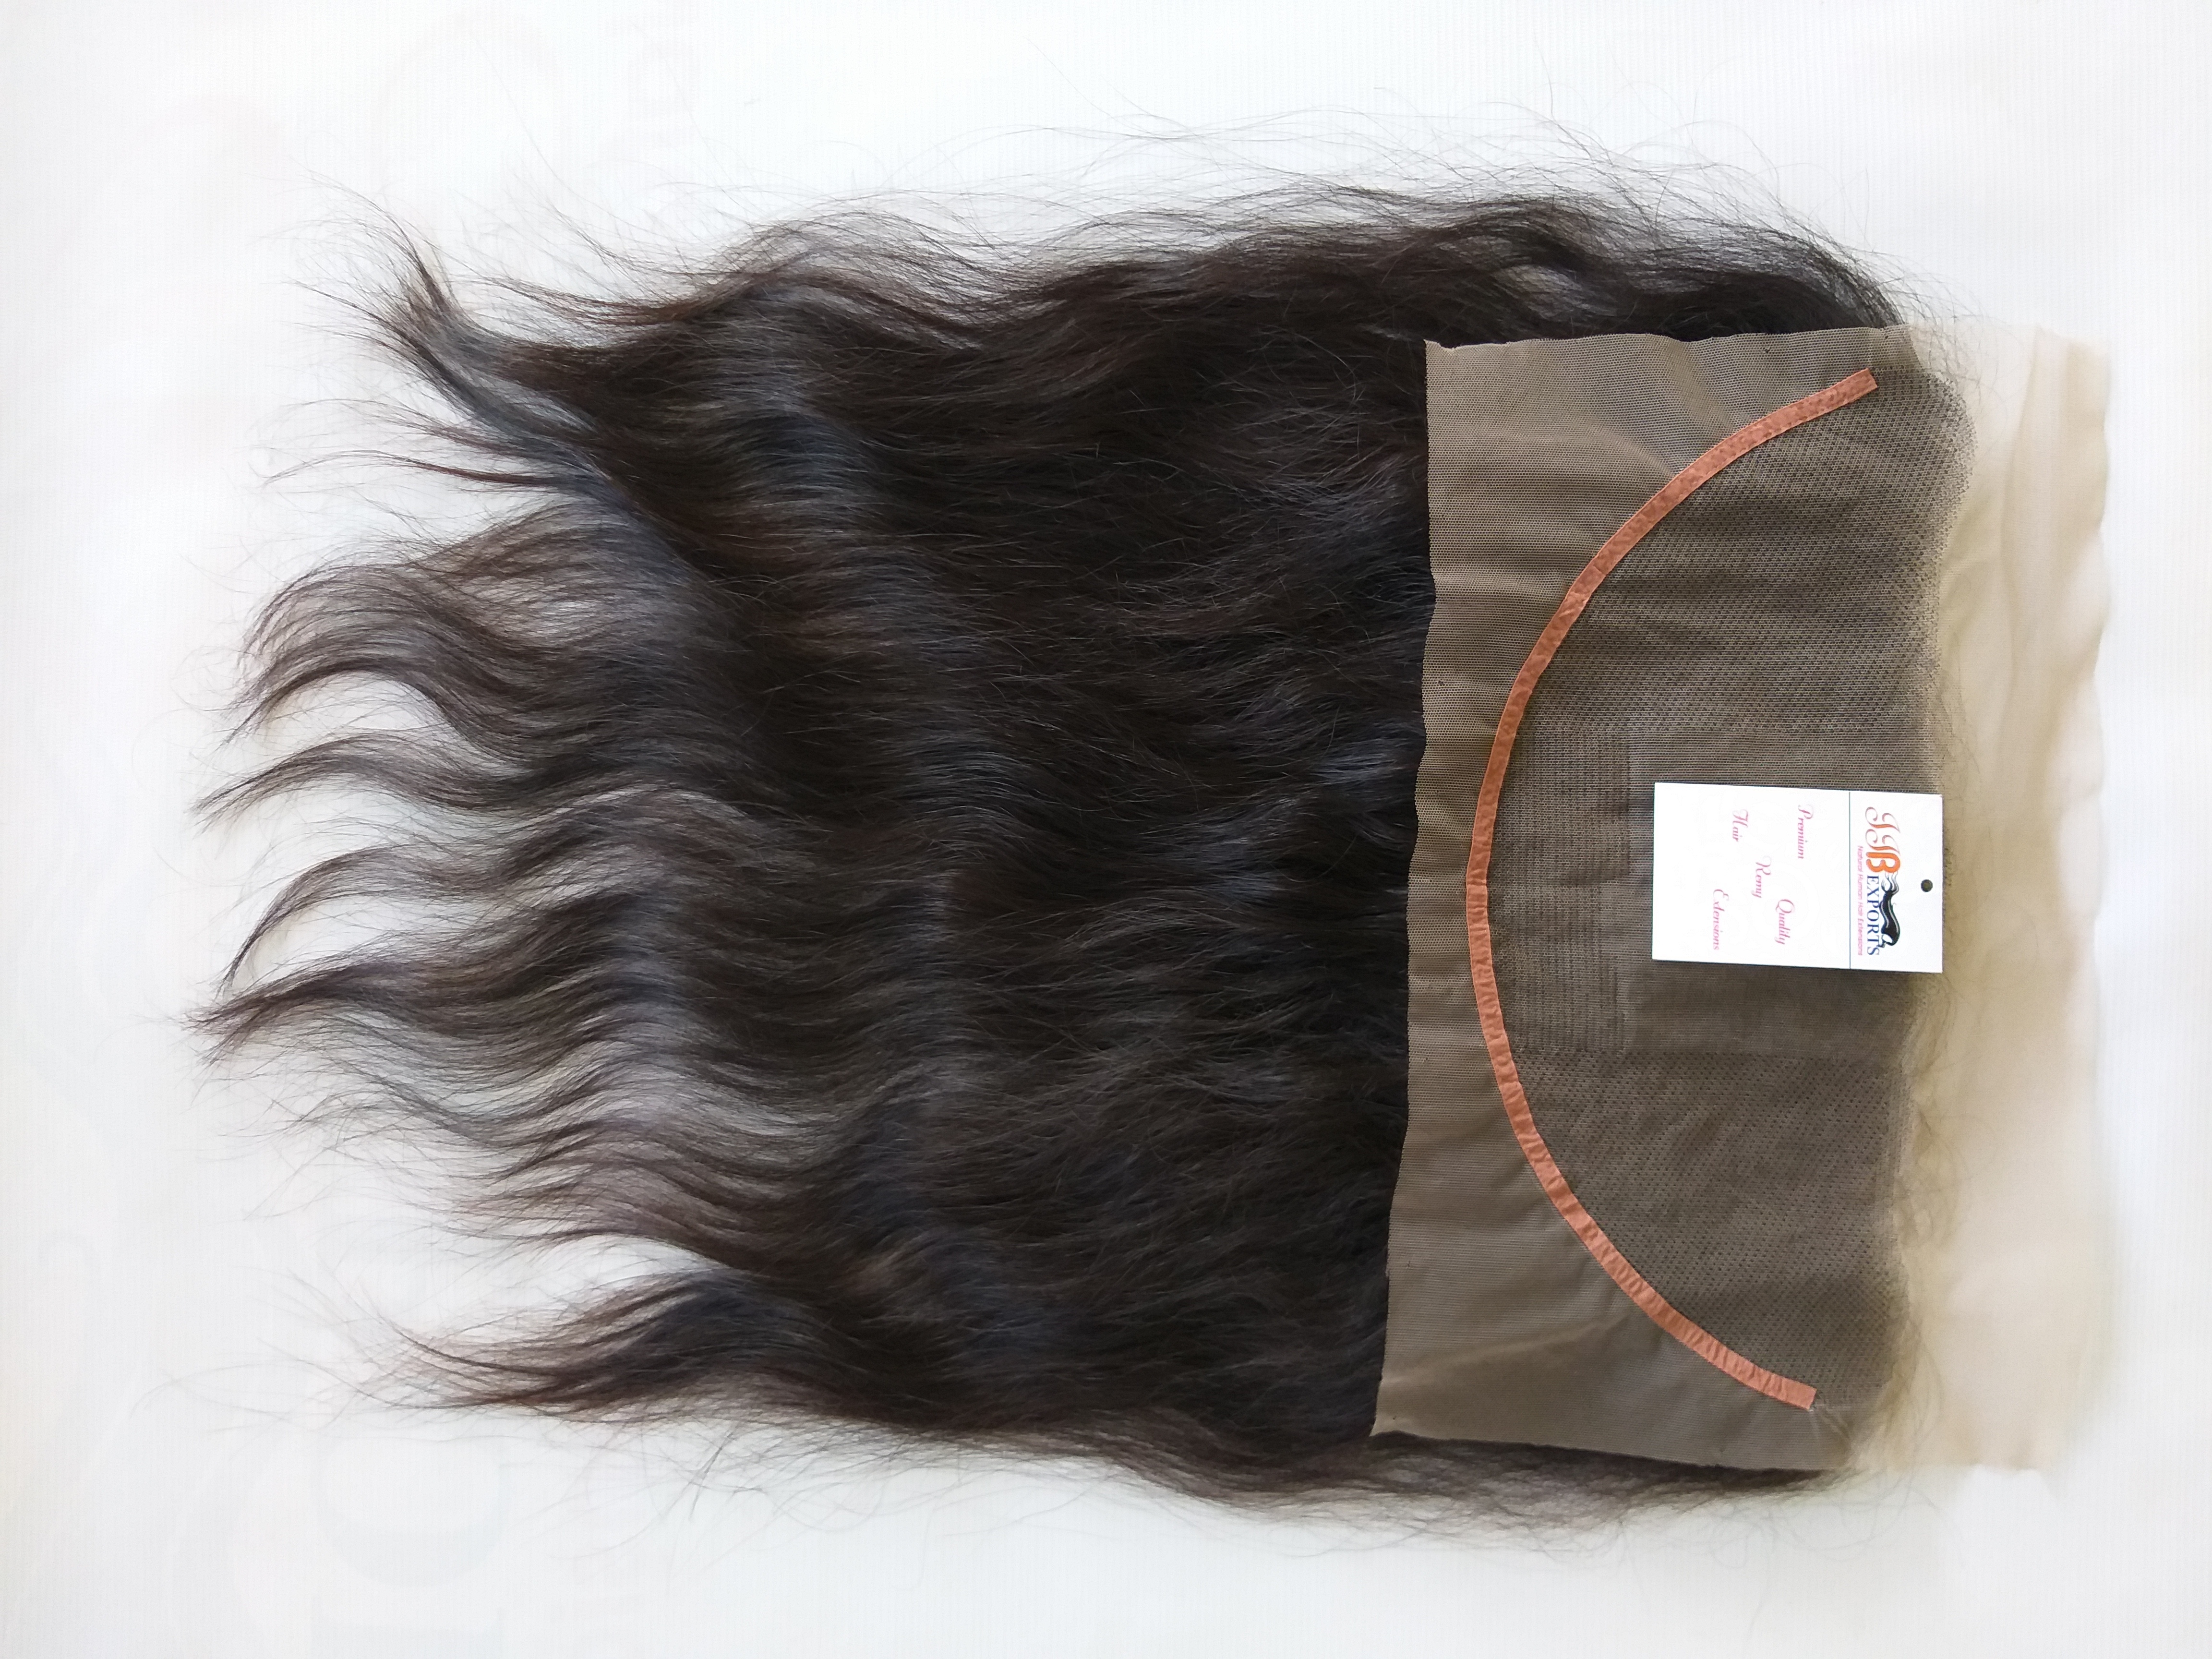 Sample Hair Bundles With Lace Closure Frontal Wholesale Brazilian Human Weave Hair